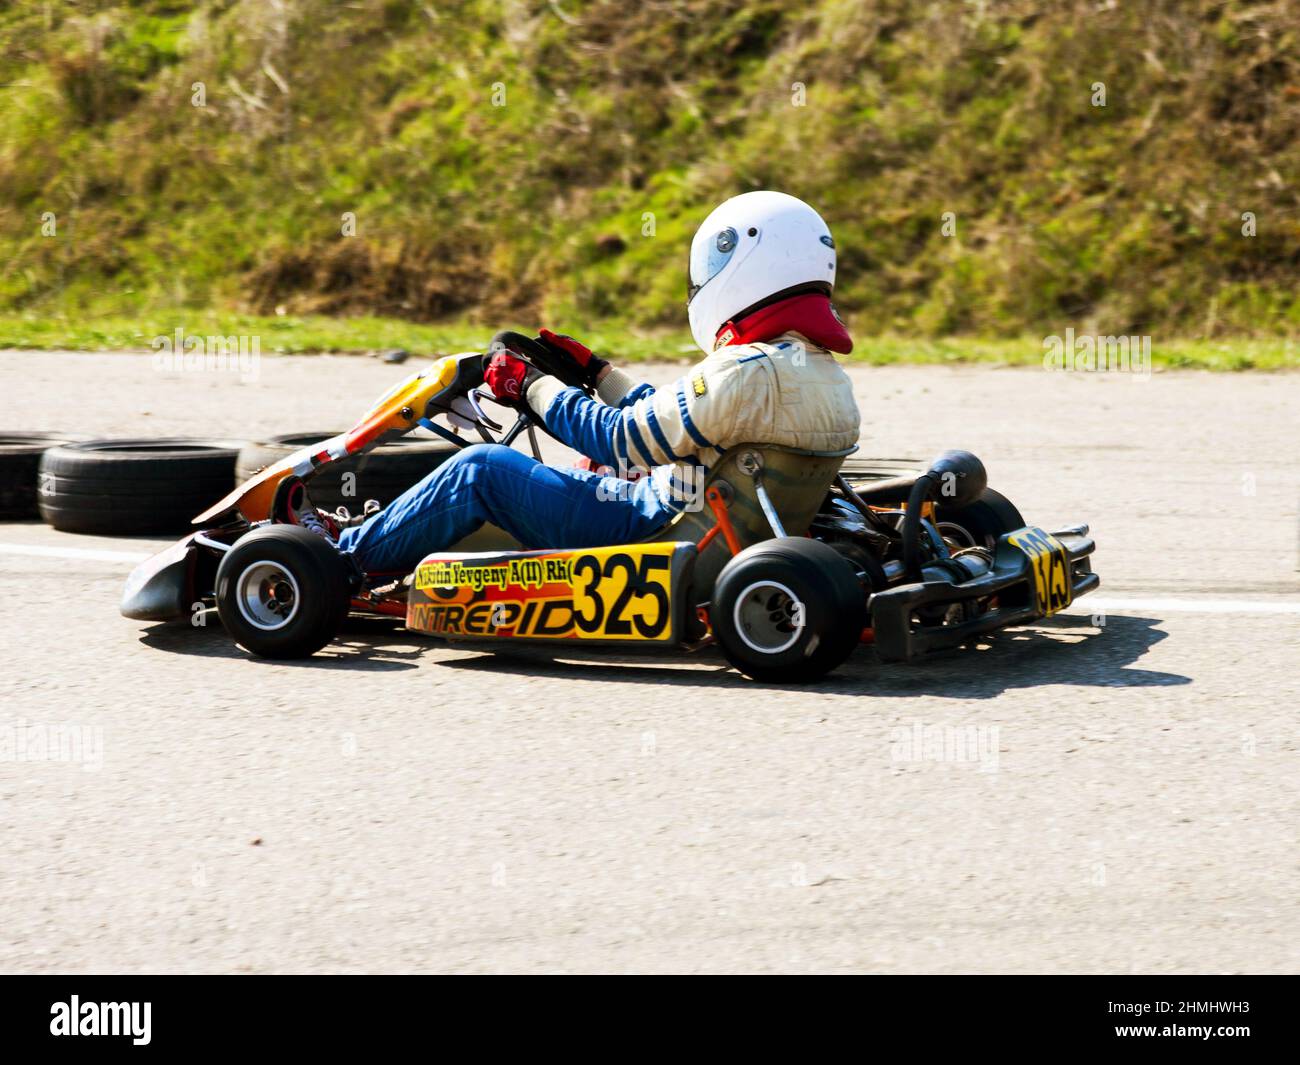 ODESSA, UKRAINE - APRIL 2, 2017: Competitions on the picture, pilots in helmet and in racing clothes participate in the card race. Carting show. Child Stock Photo